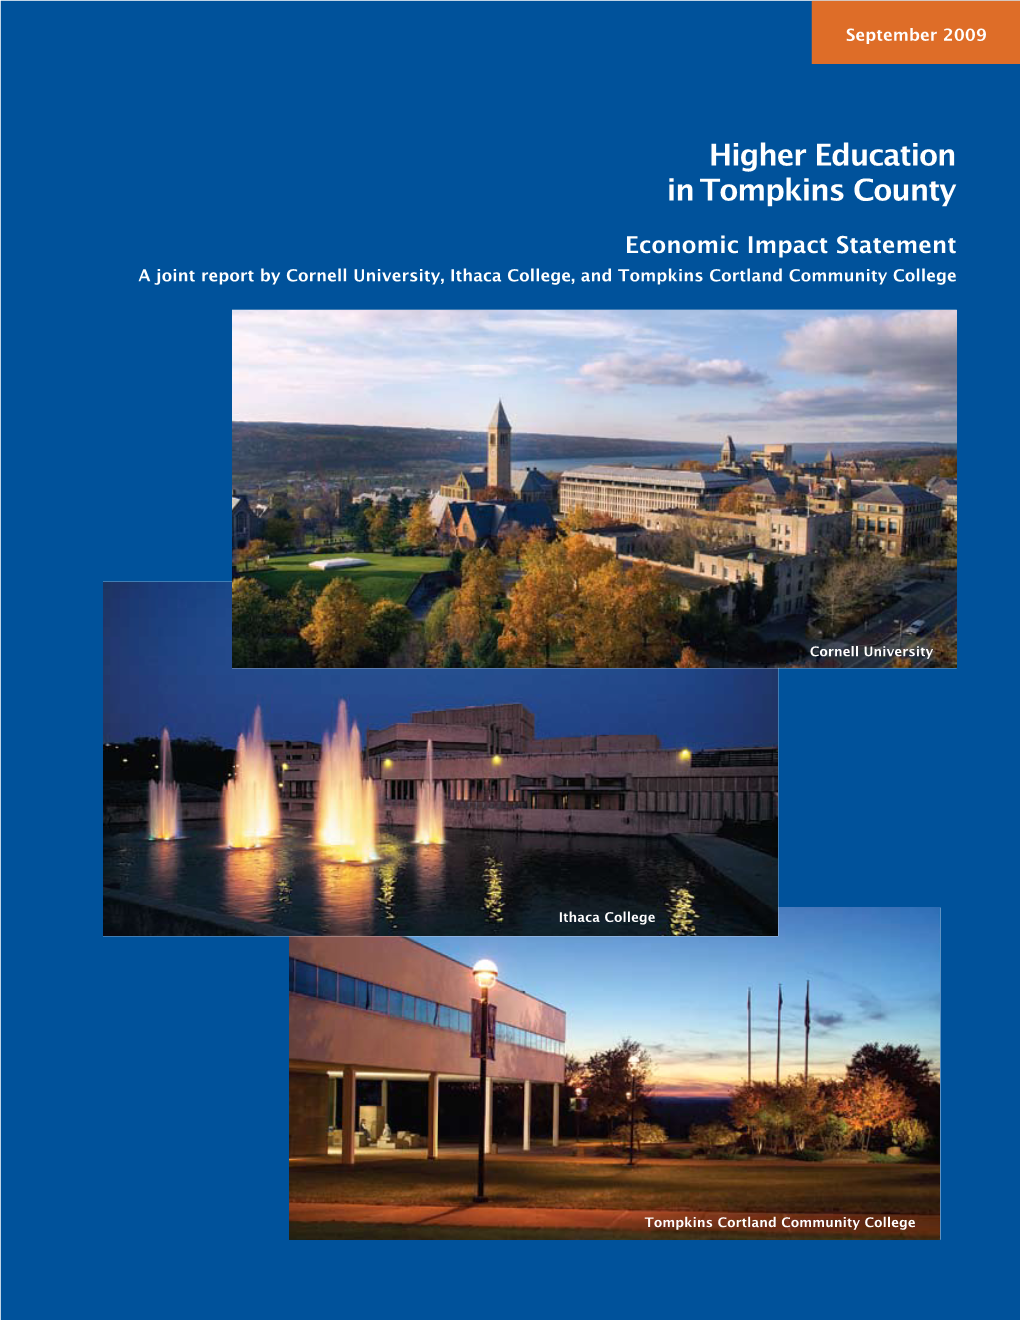 Higher Education in Tompkins County